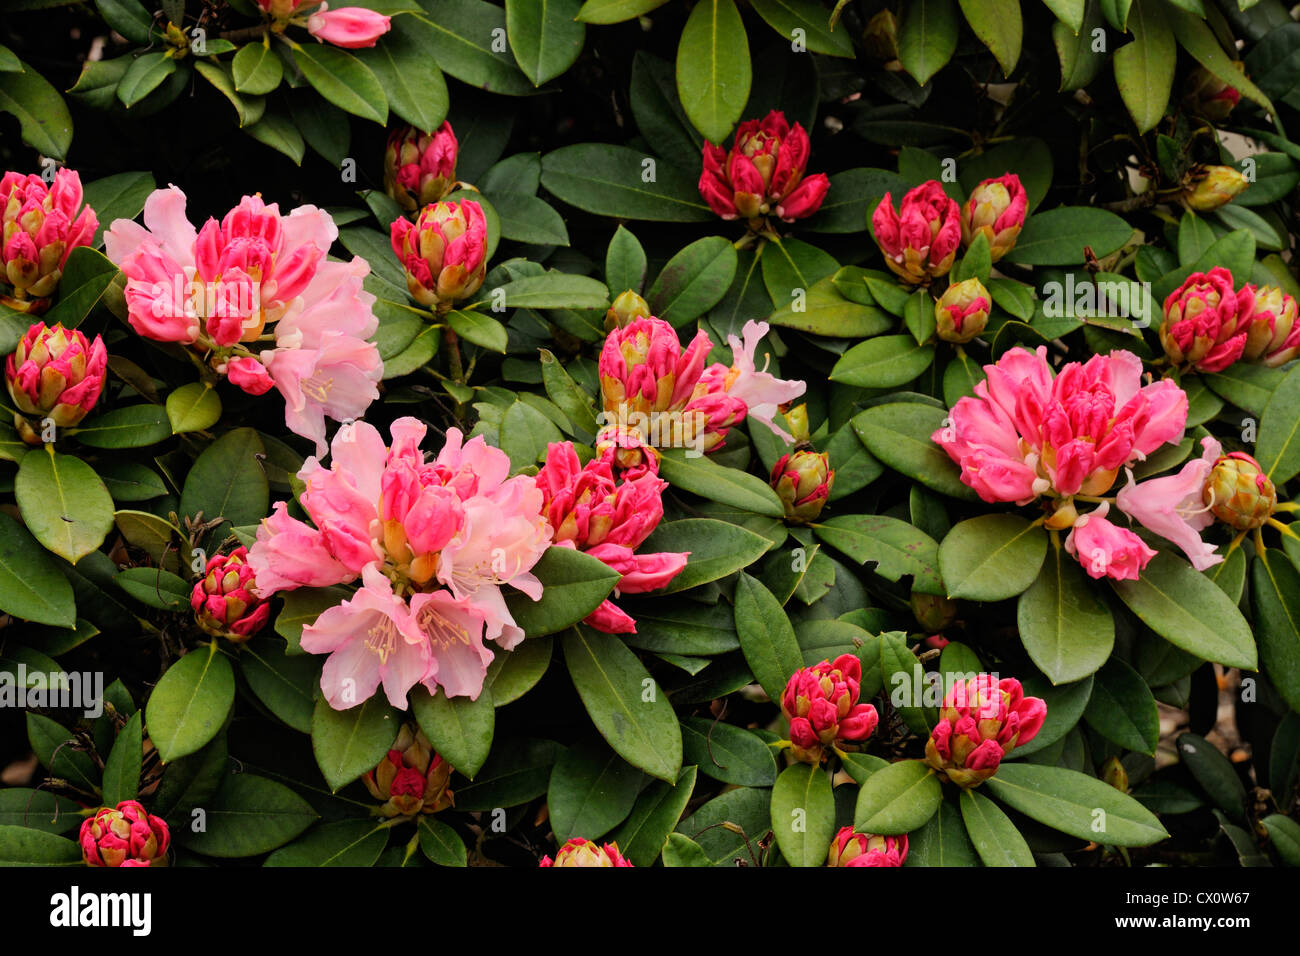 Rhododendrons in bloom, Gig Harbour, Washington, USA Stock Photo